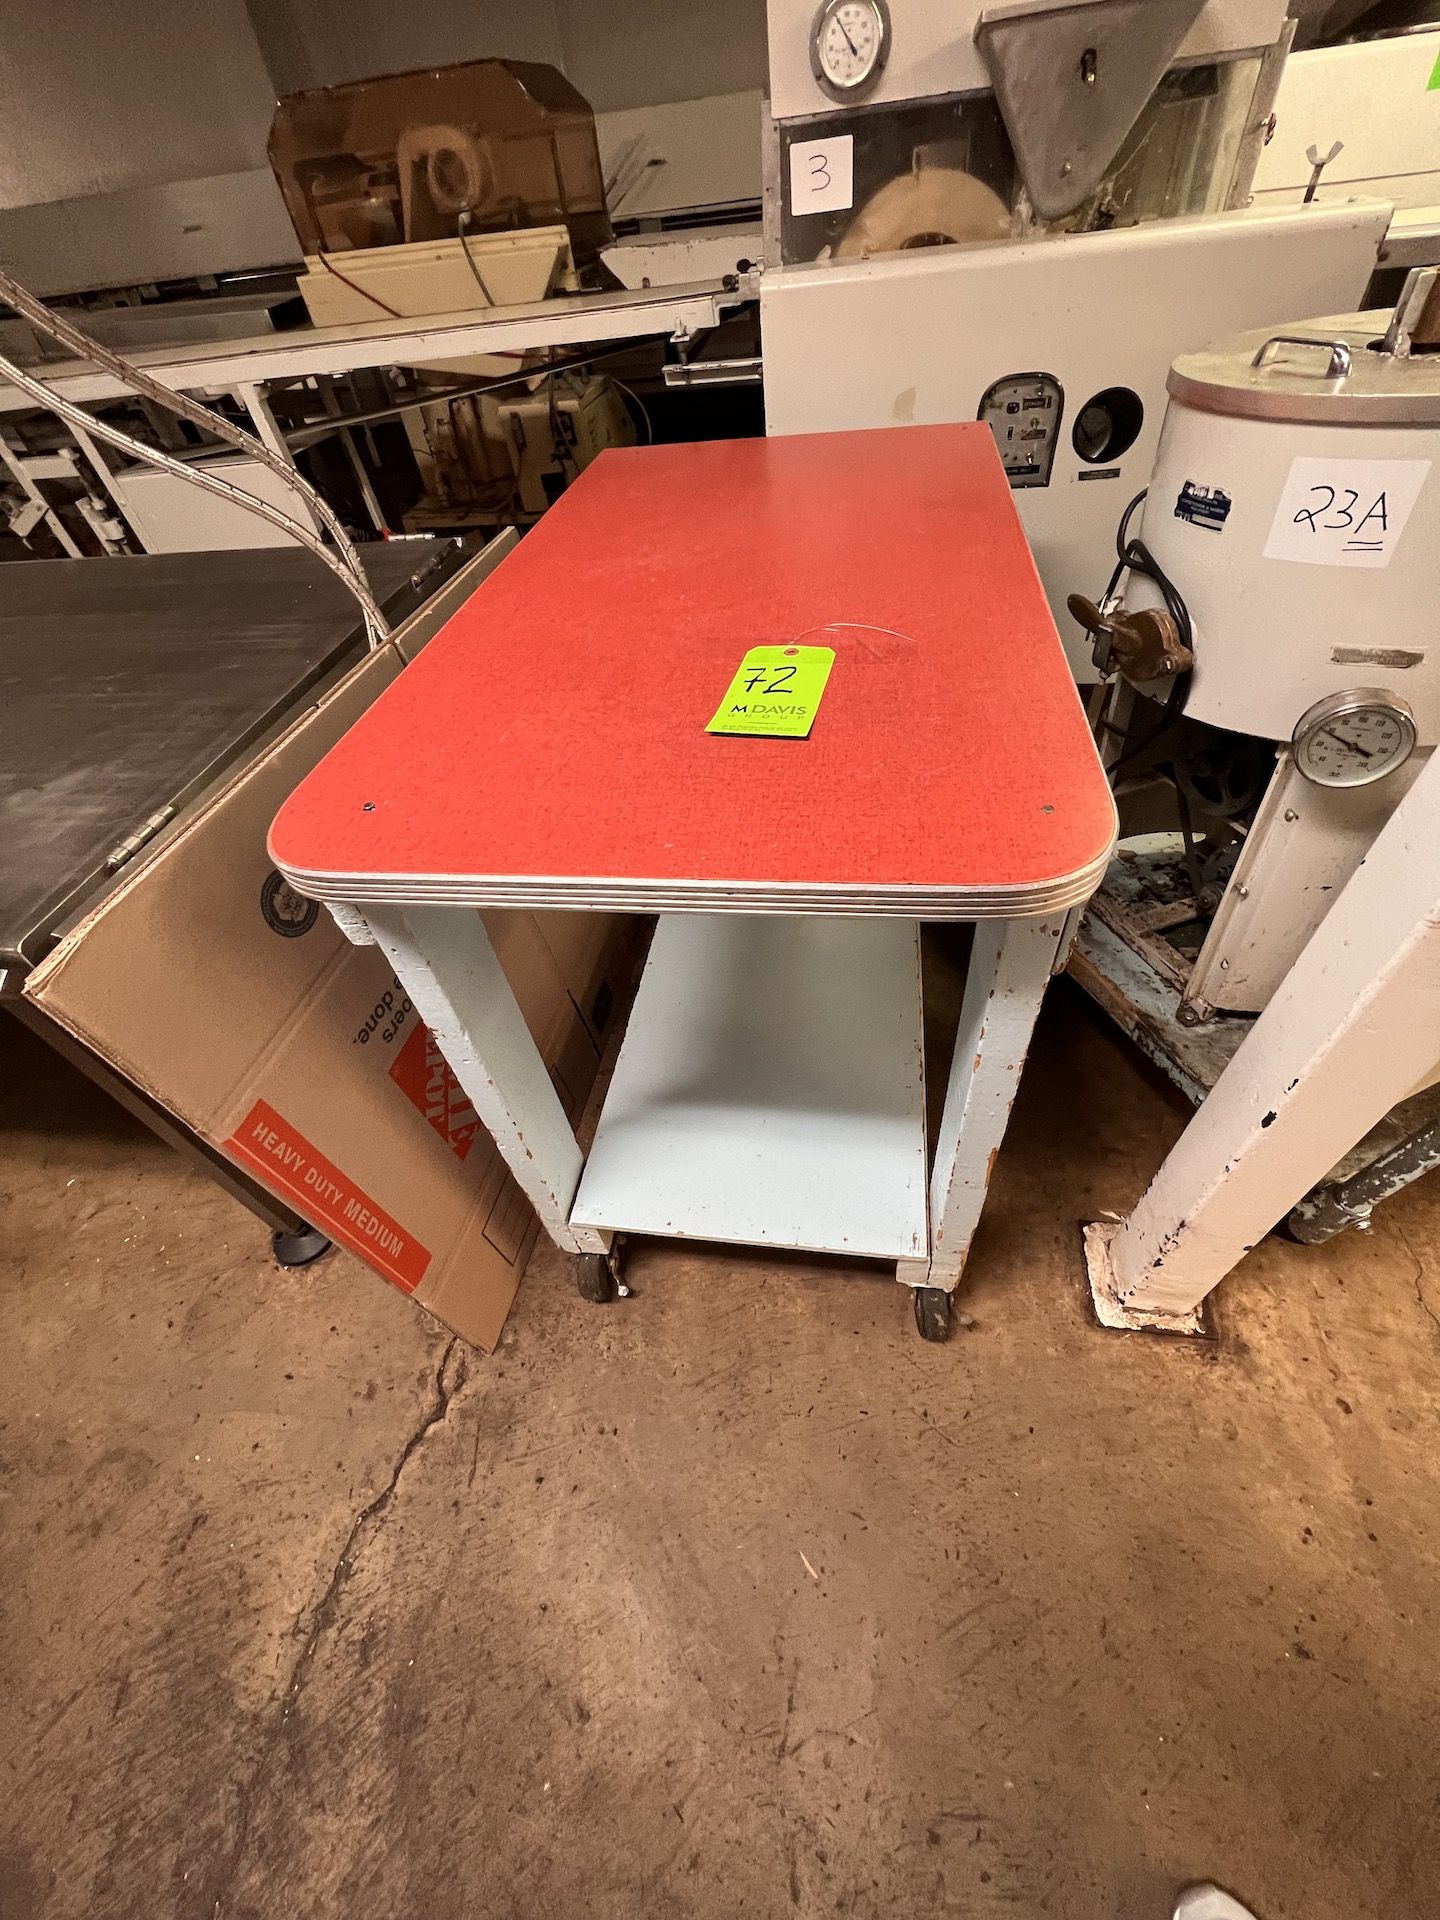 TABLE MOUNTED ON CASTERS42"" L X 24"" W X 34"" H